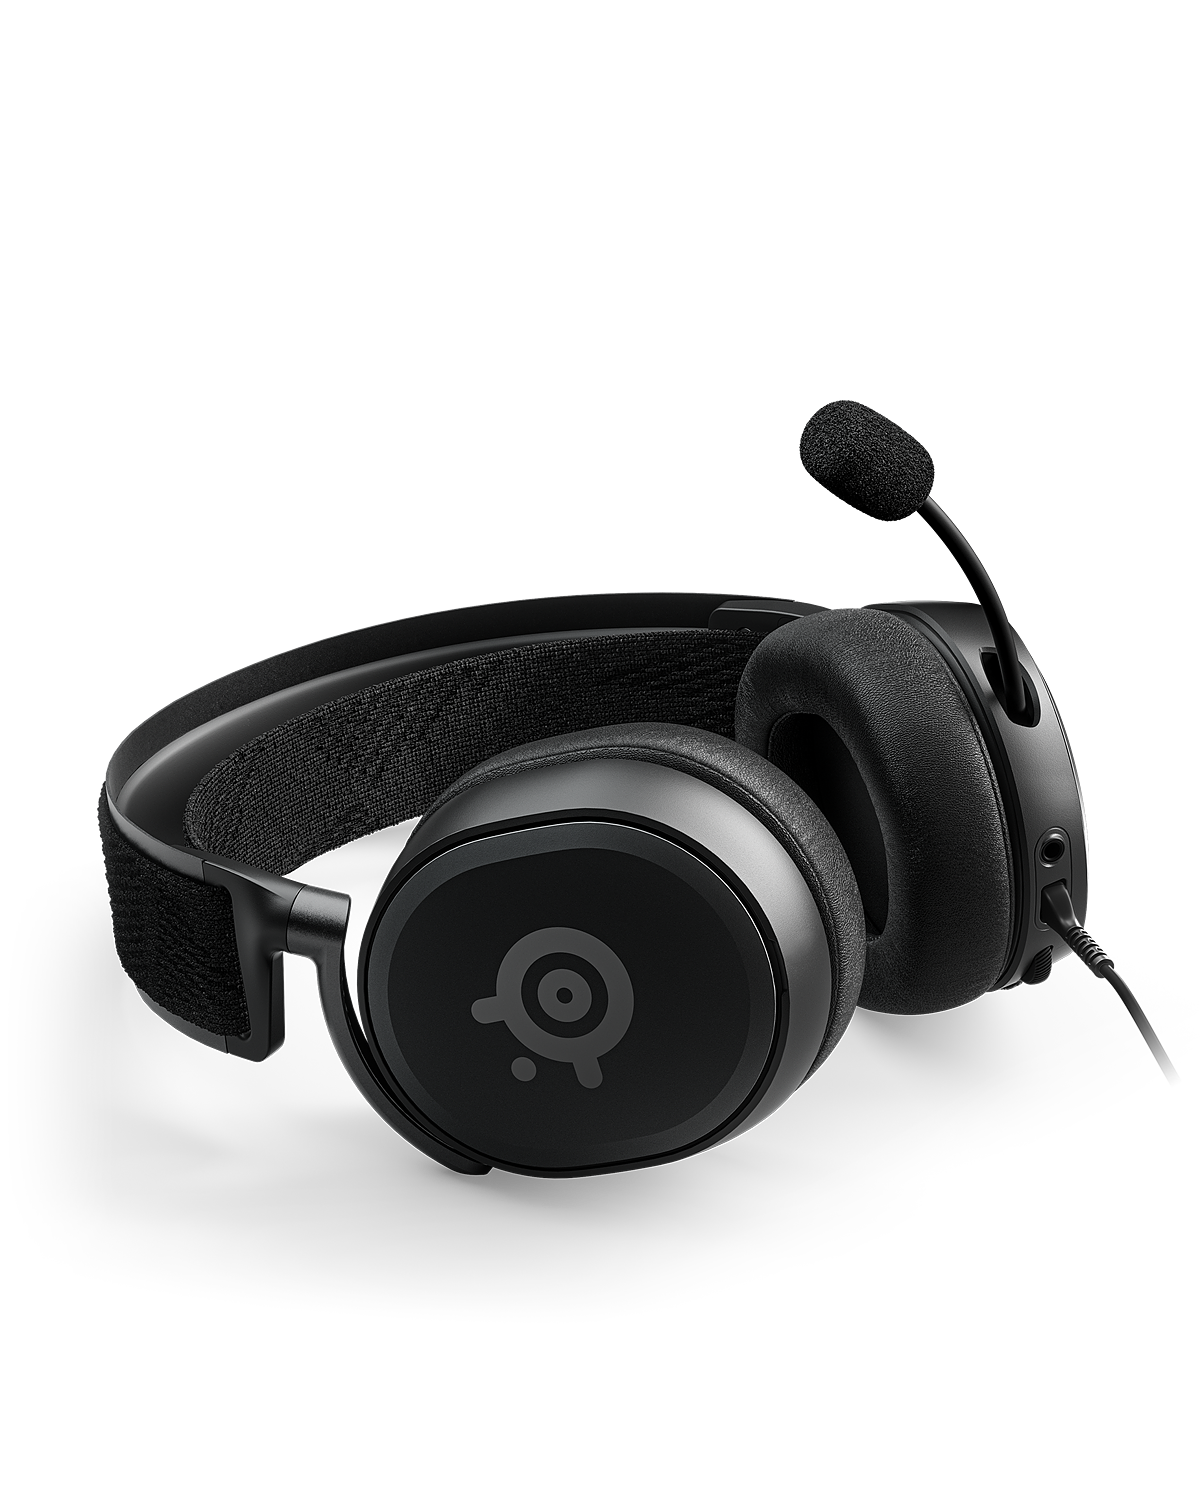 An Arctis Prime lays on its side with the mic fully extended.